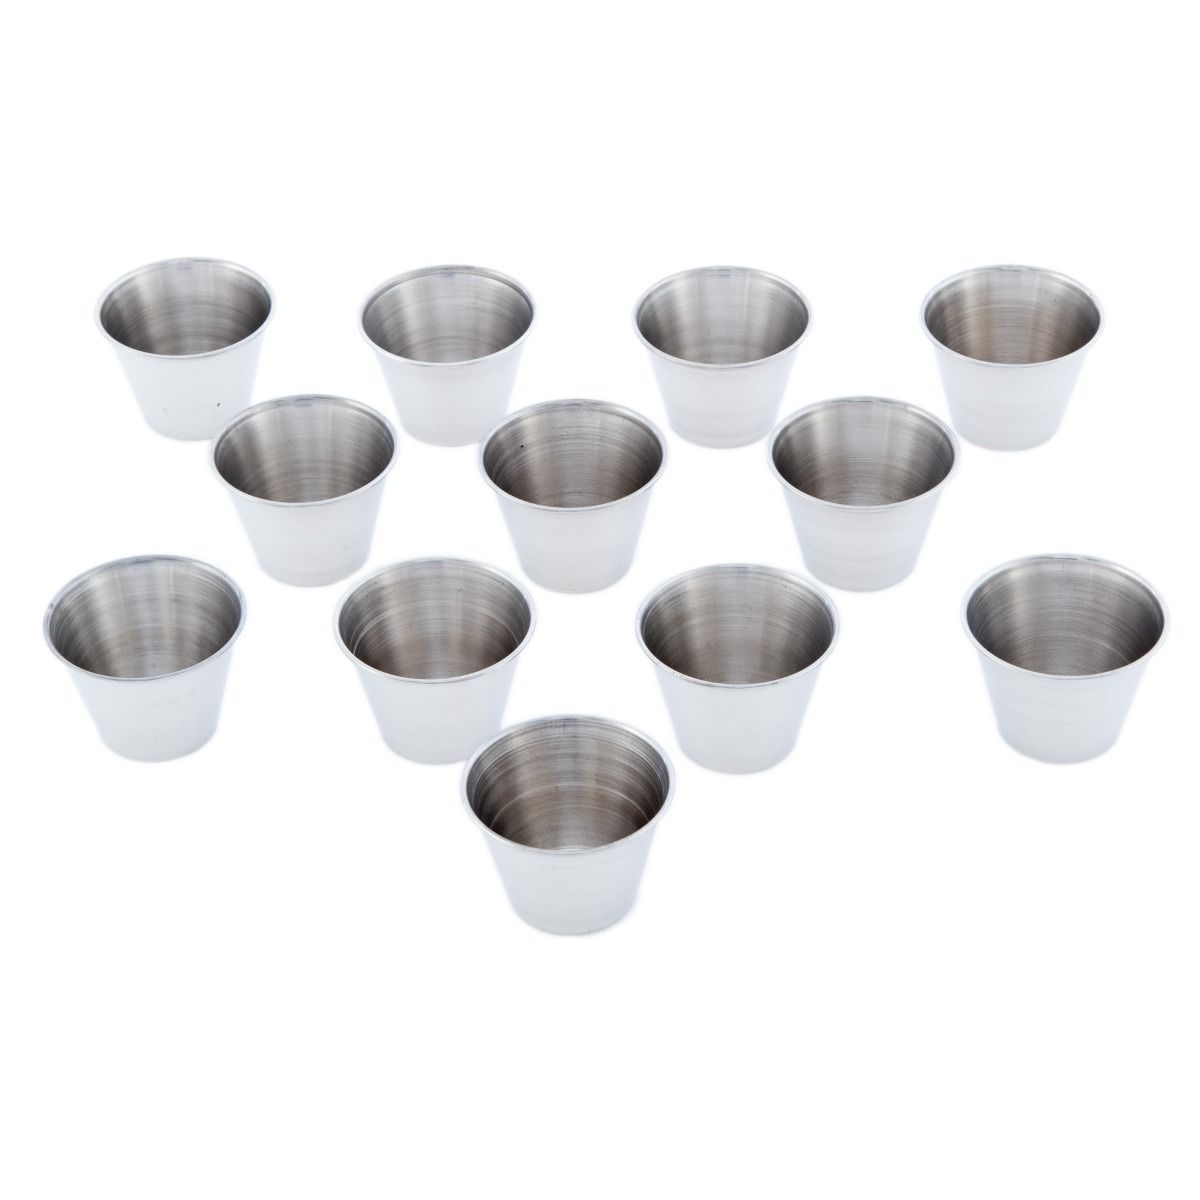 Stainless Steel Sauce Cups 2.5 oz Ramekins for Condiments Dipping